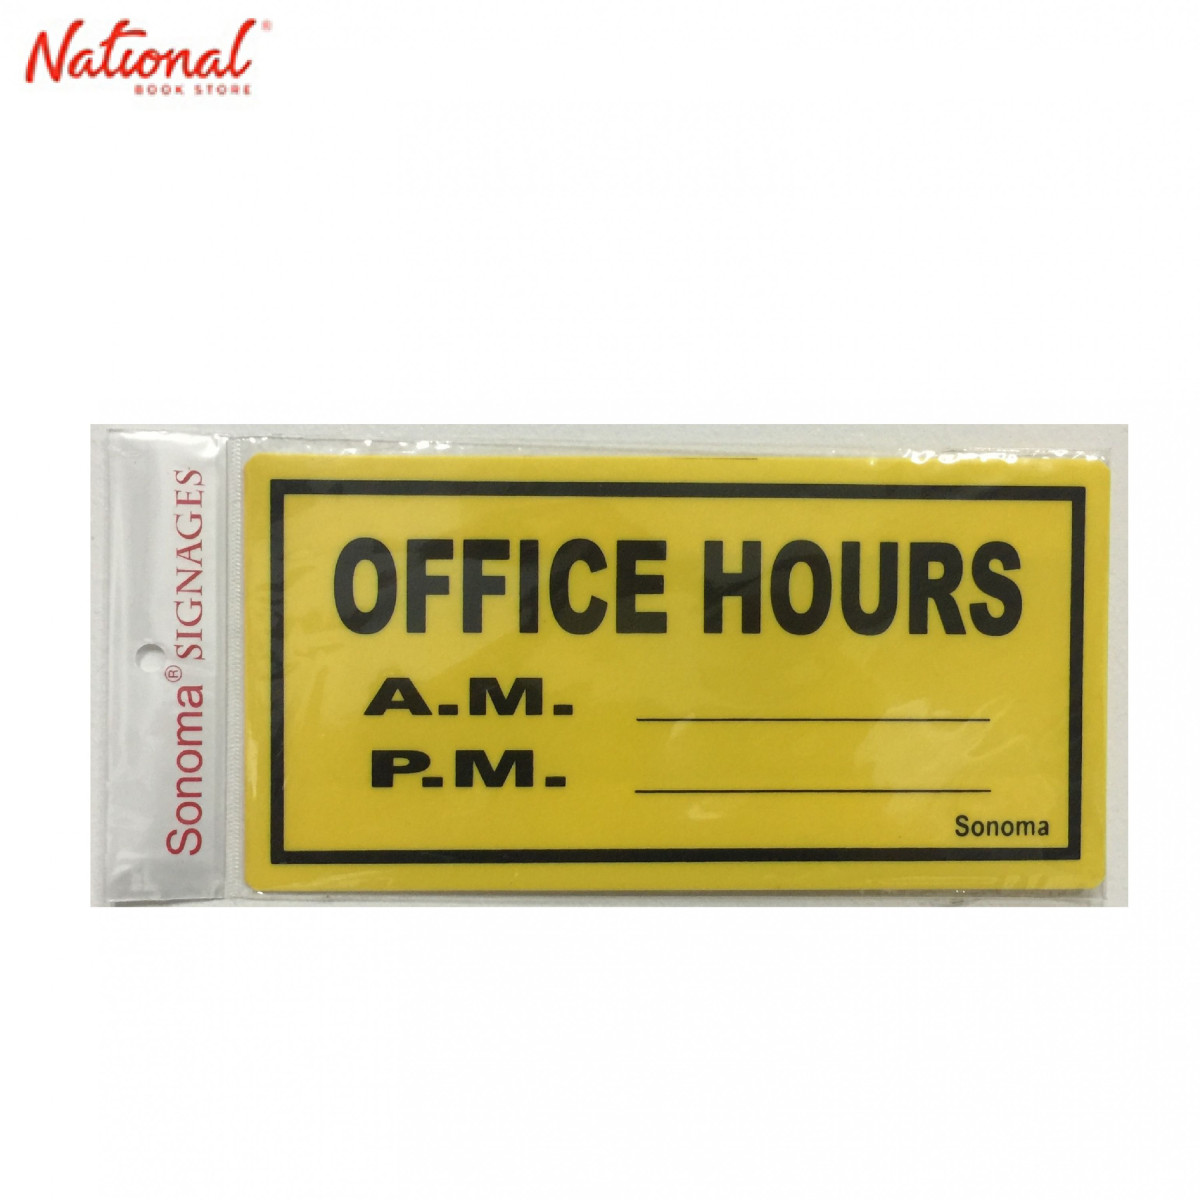 Sonoma Signage 4x8 inches Yellow Office Hours - Office - Business - Essentials